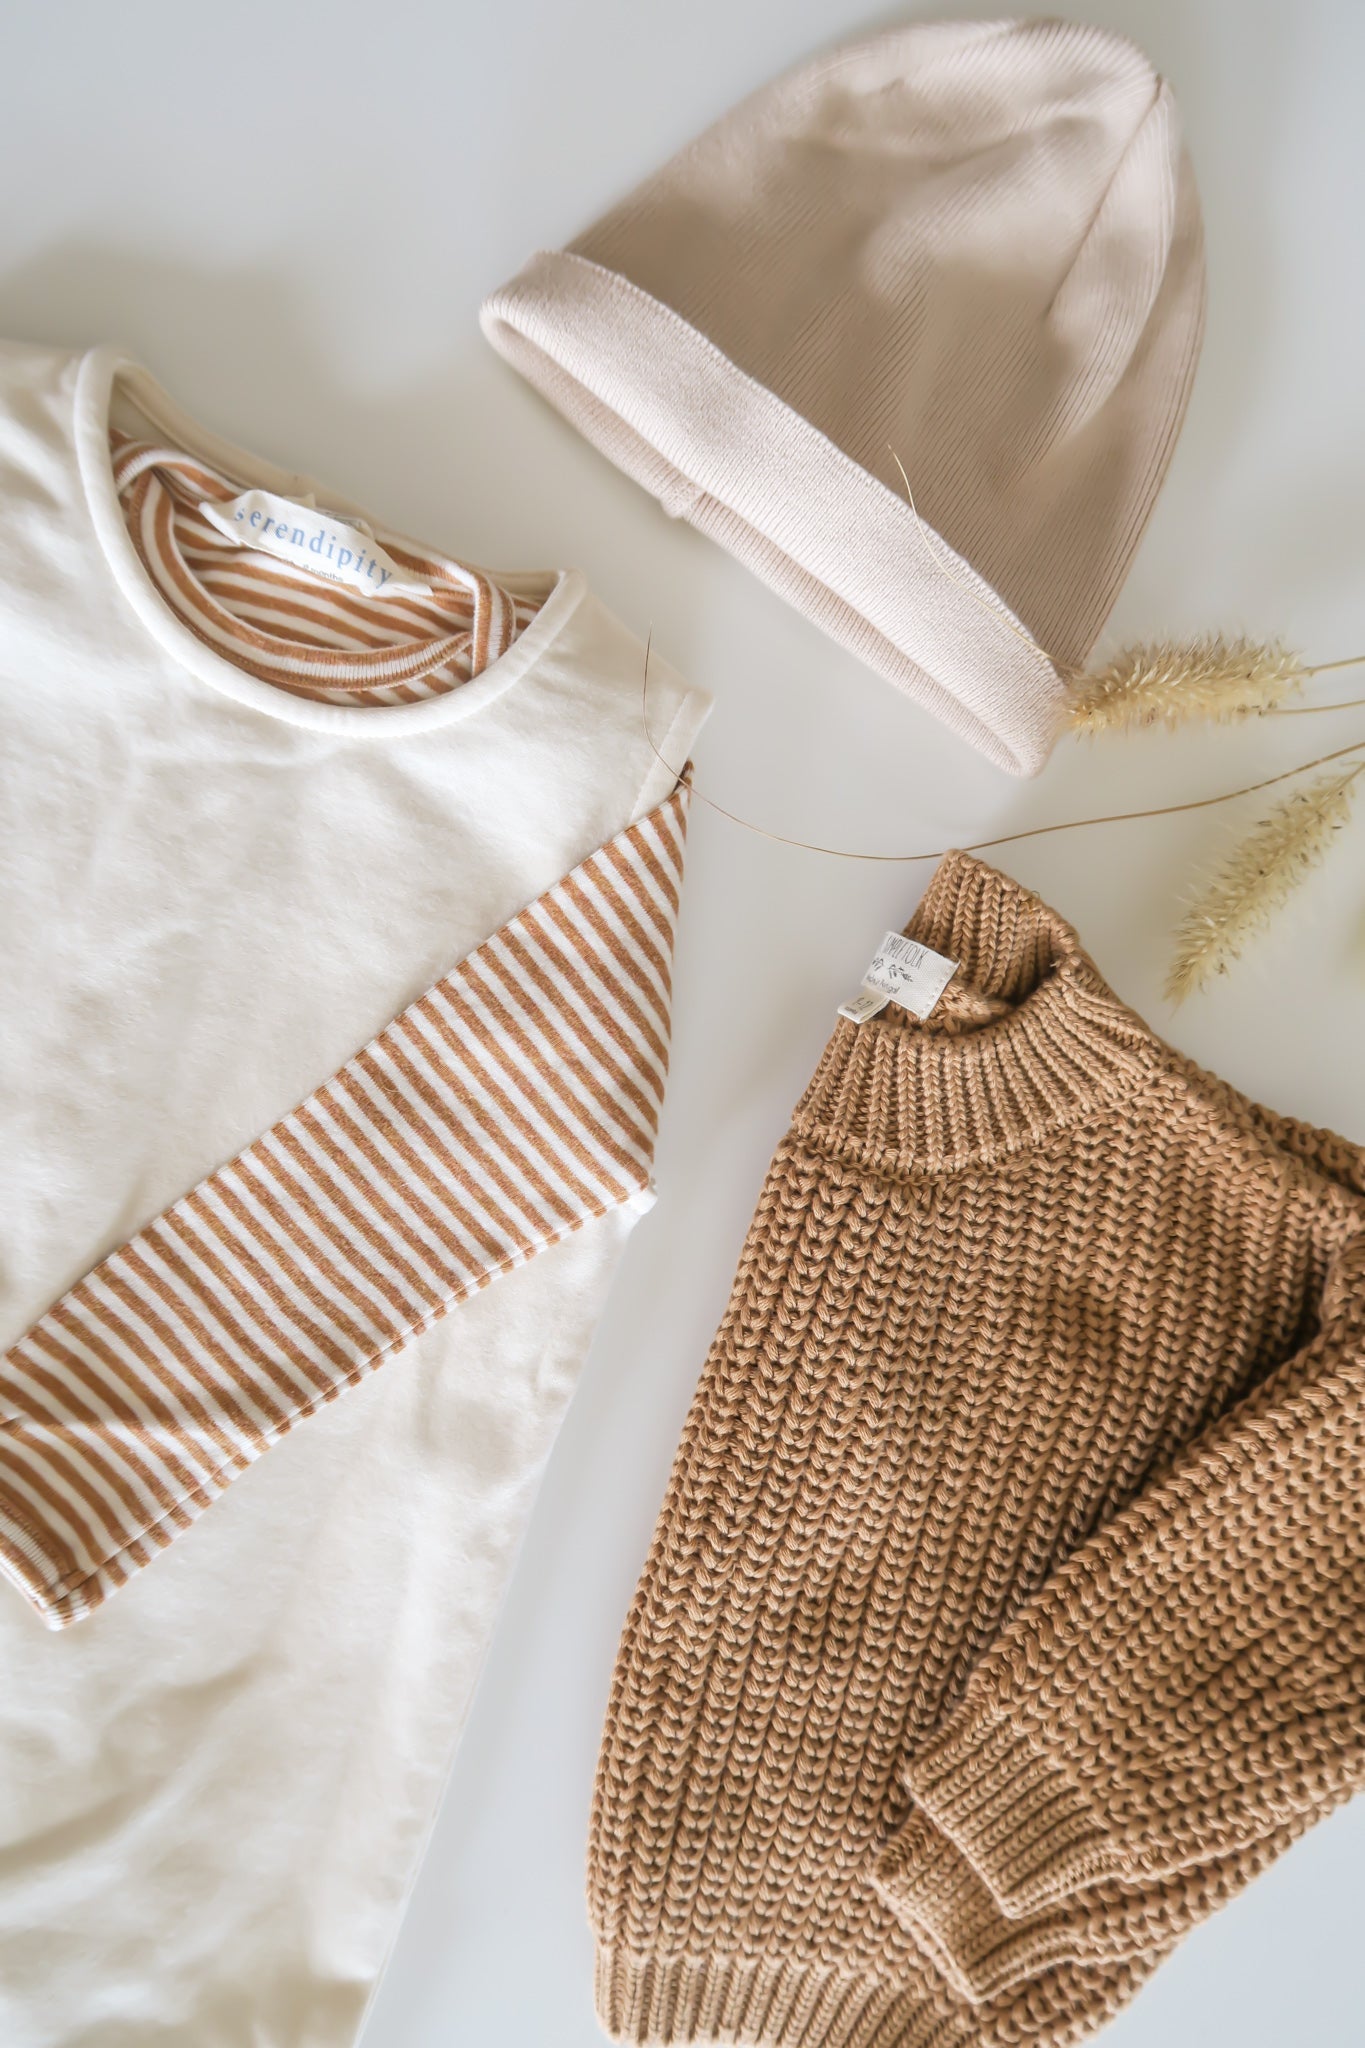 Organic baby clothes in brown from OiOiOi, beige and white with stripes lying on light background